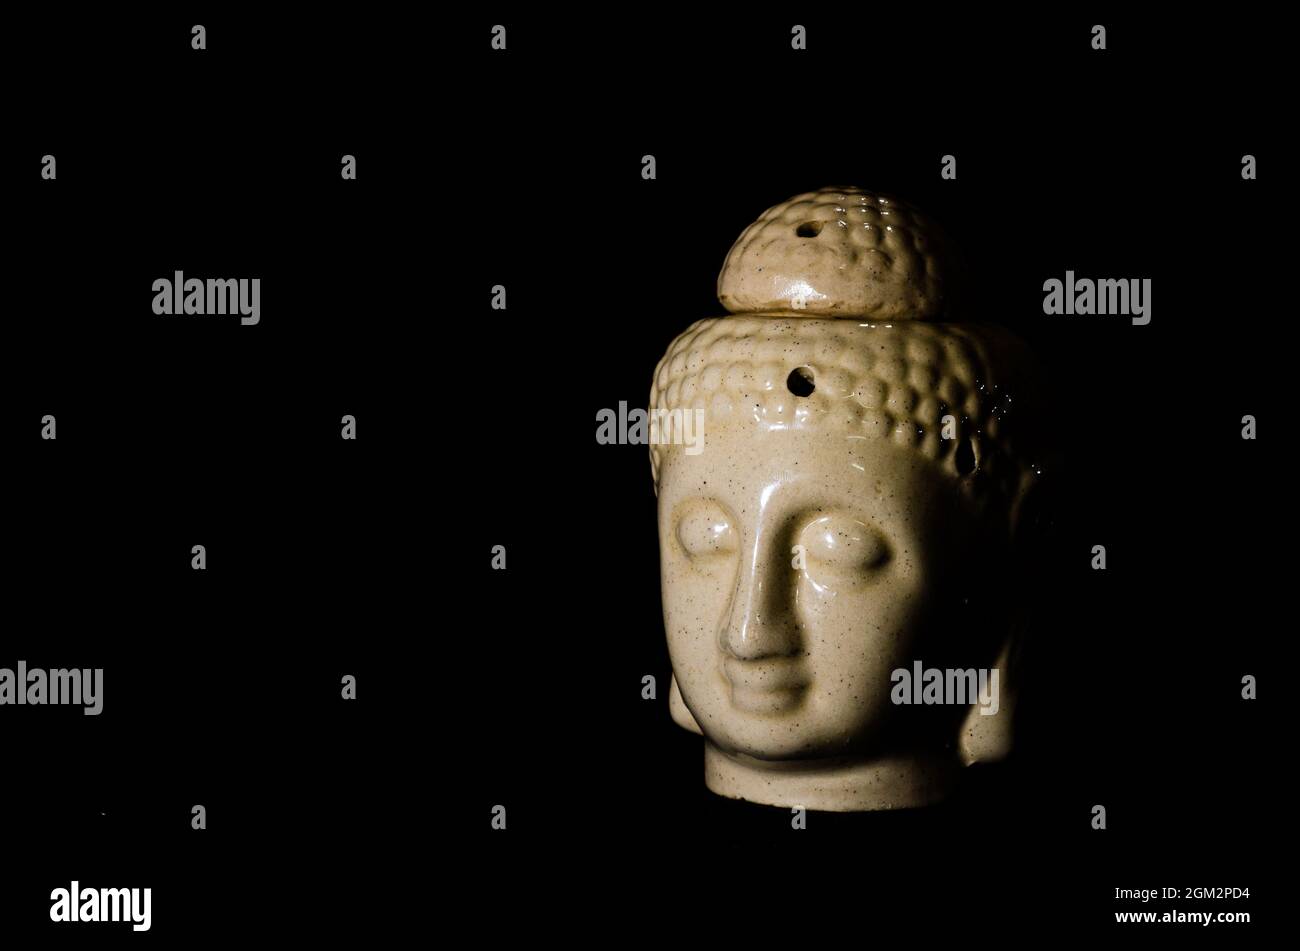 Peaceful Buddha lamp and diffuser for home Stock Photo